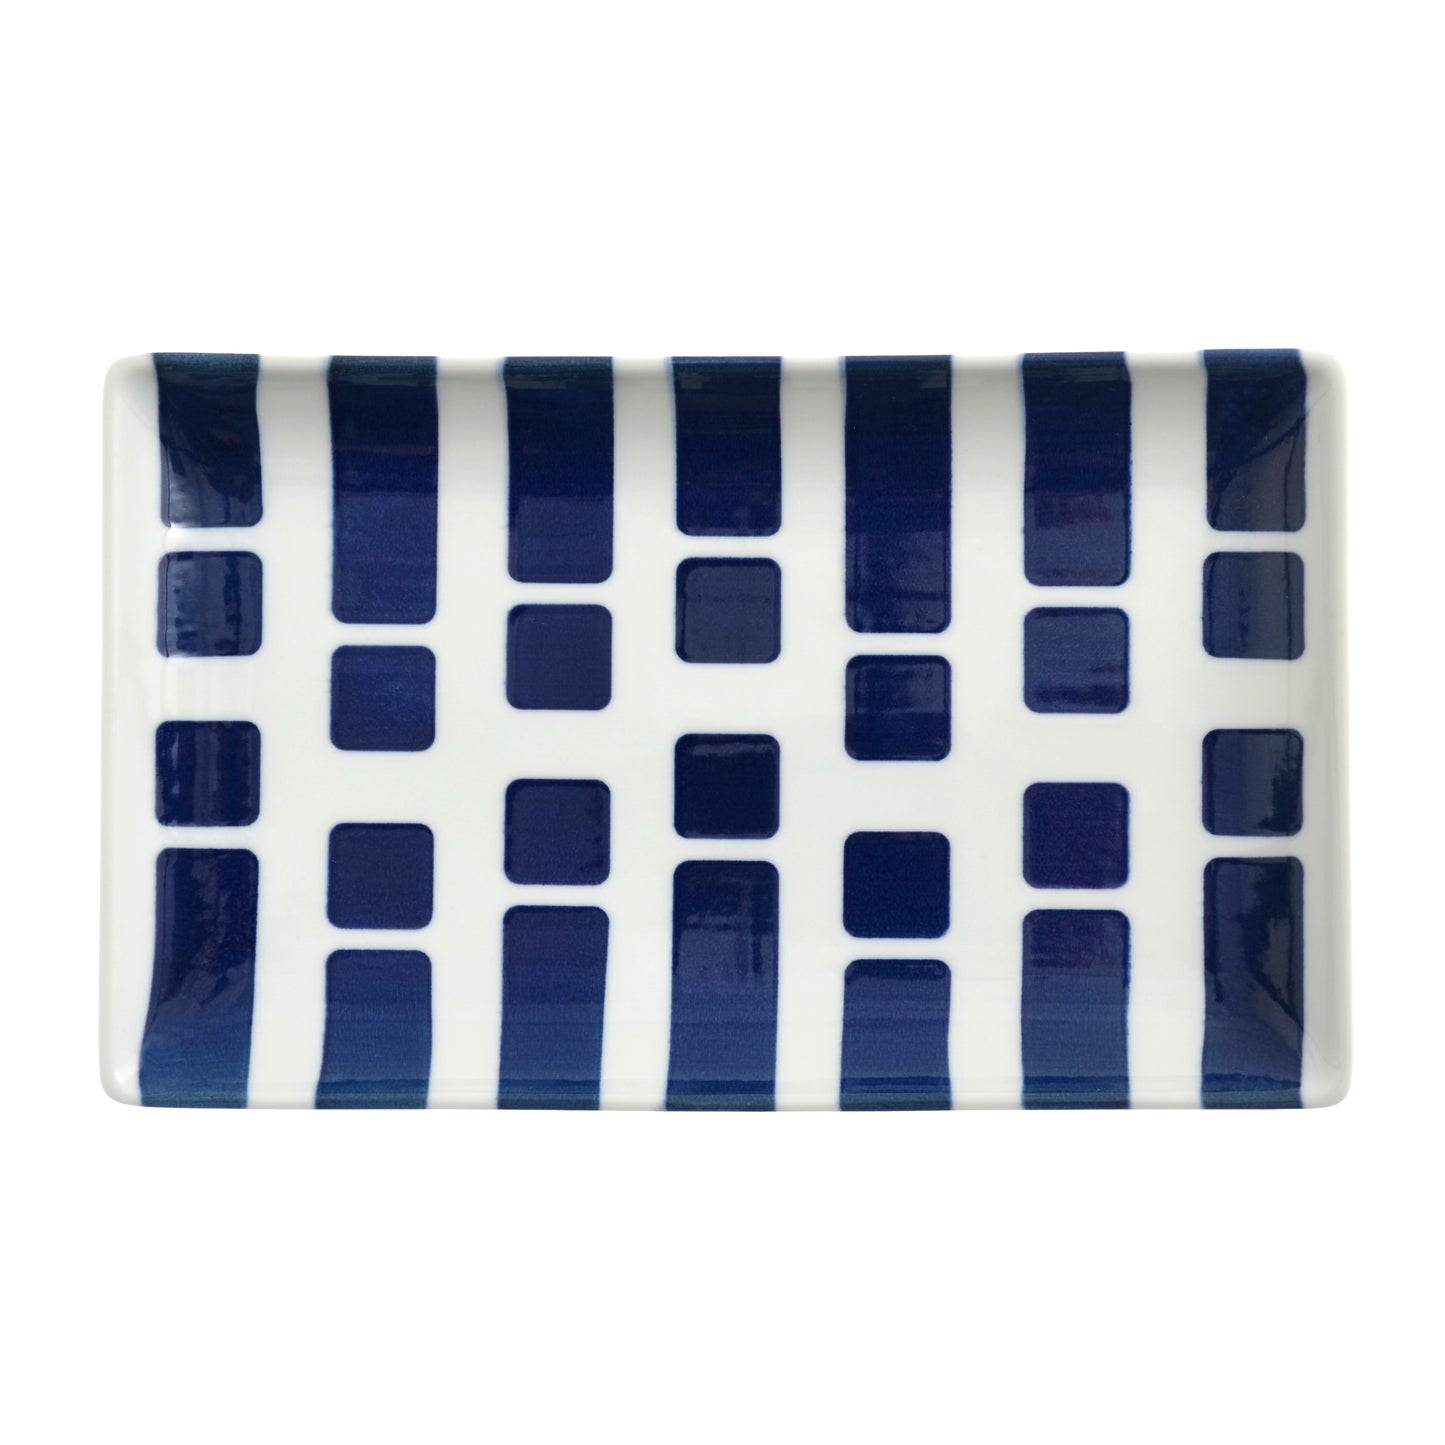 [natural69] [Hasami ware] [swatch] [Long angle plate] Grilled plate Rectangular grilled plate Long plate Natural rock Swatch plate